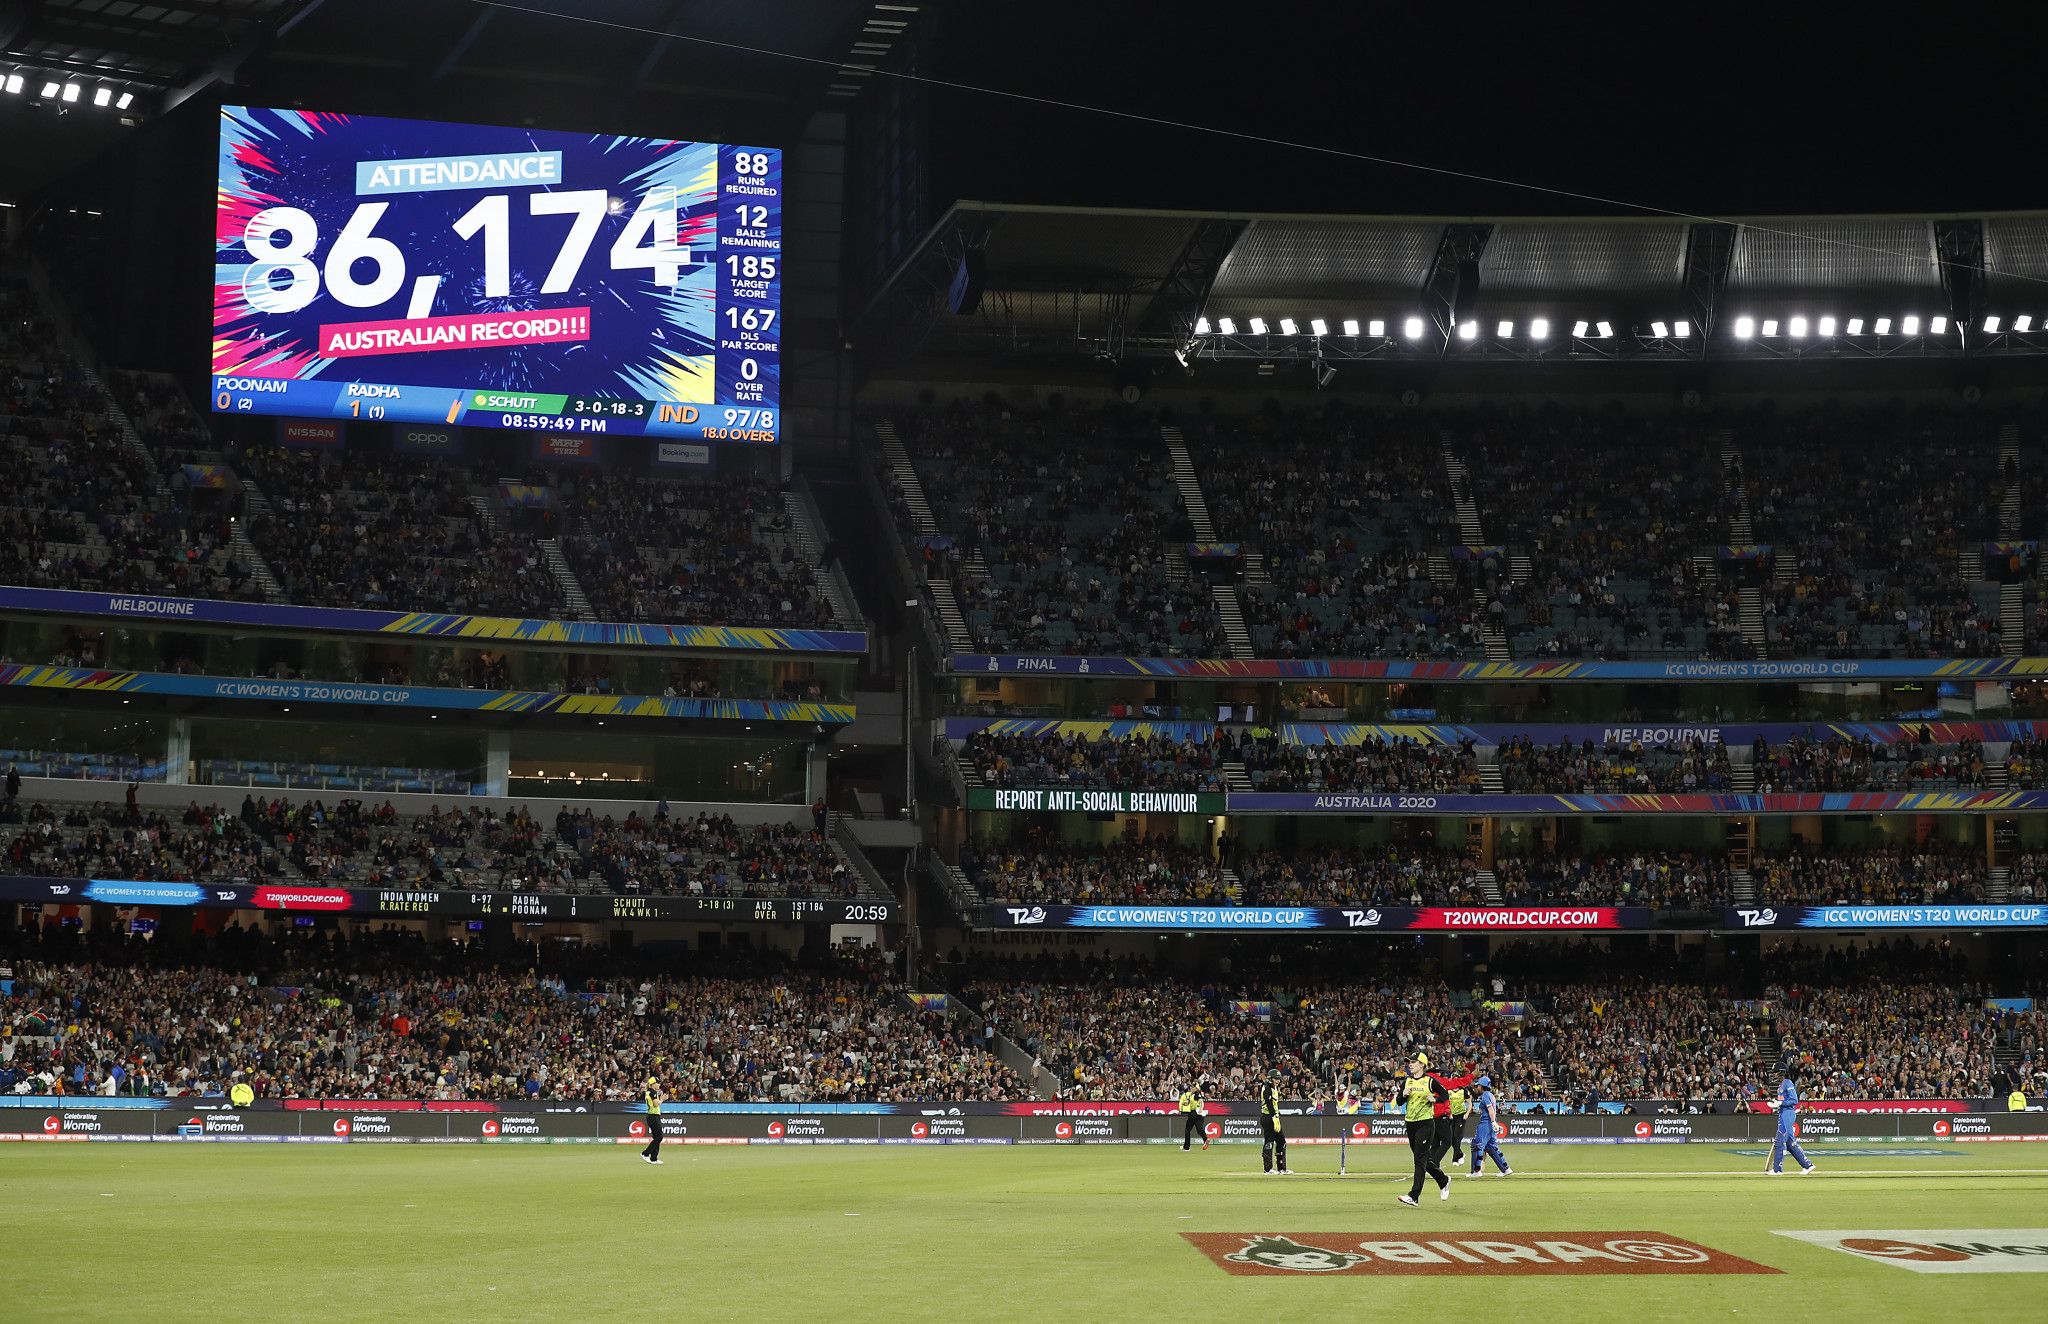 ICC releases record viewing figures for Women's T20 World Cup